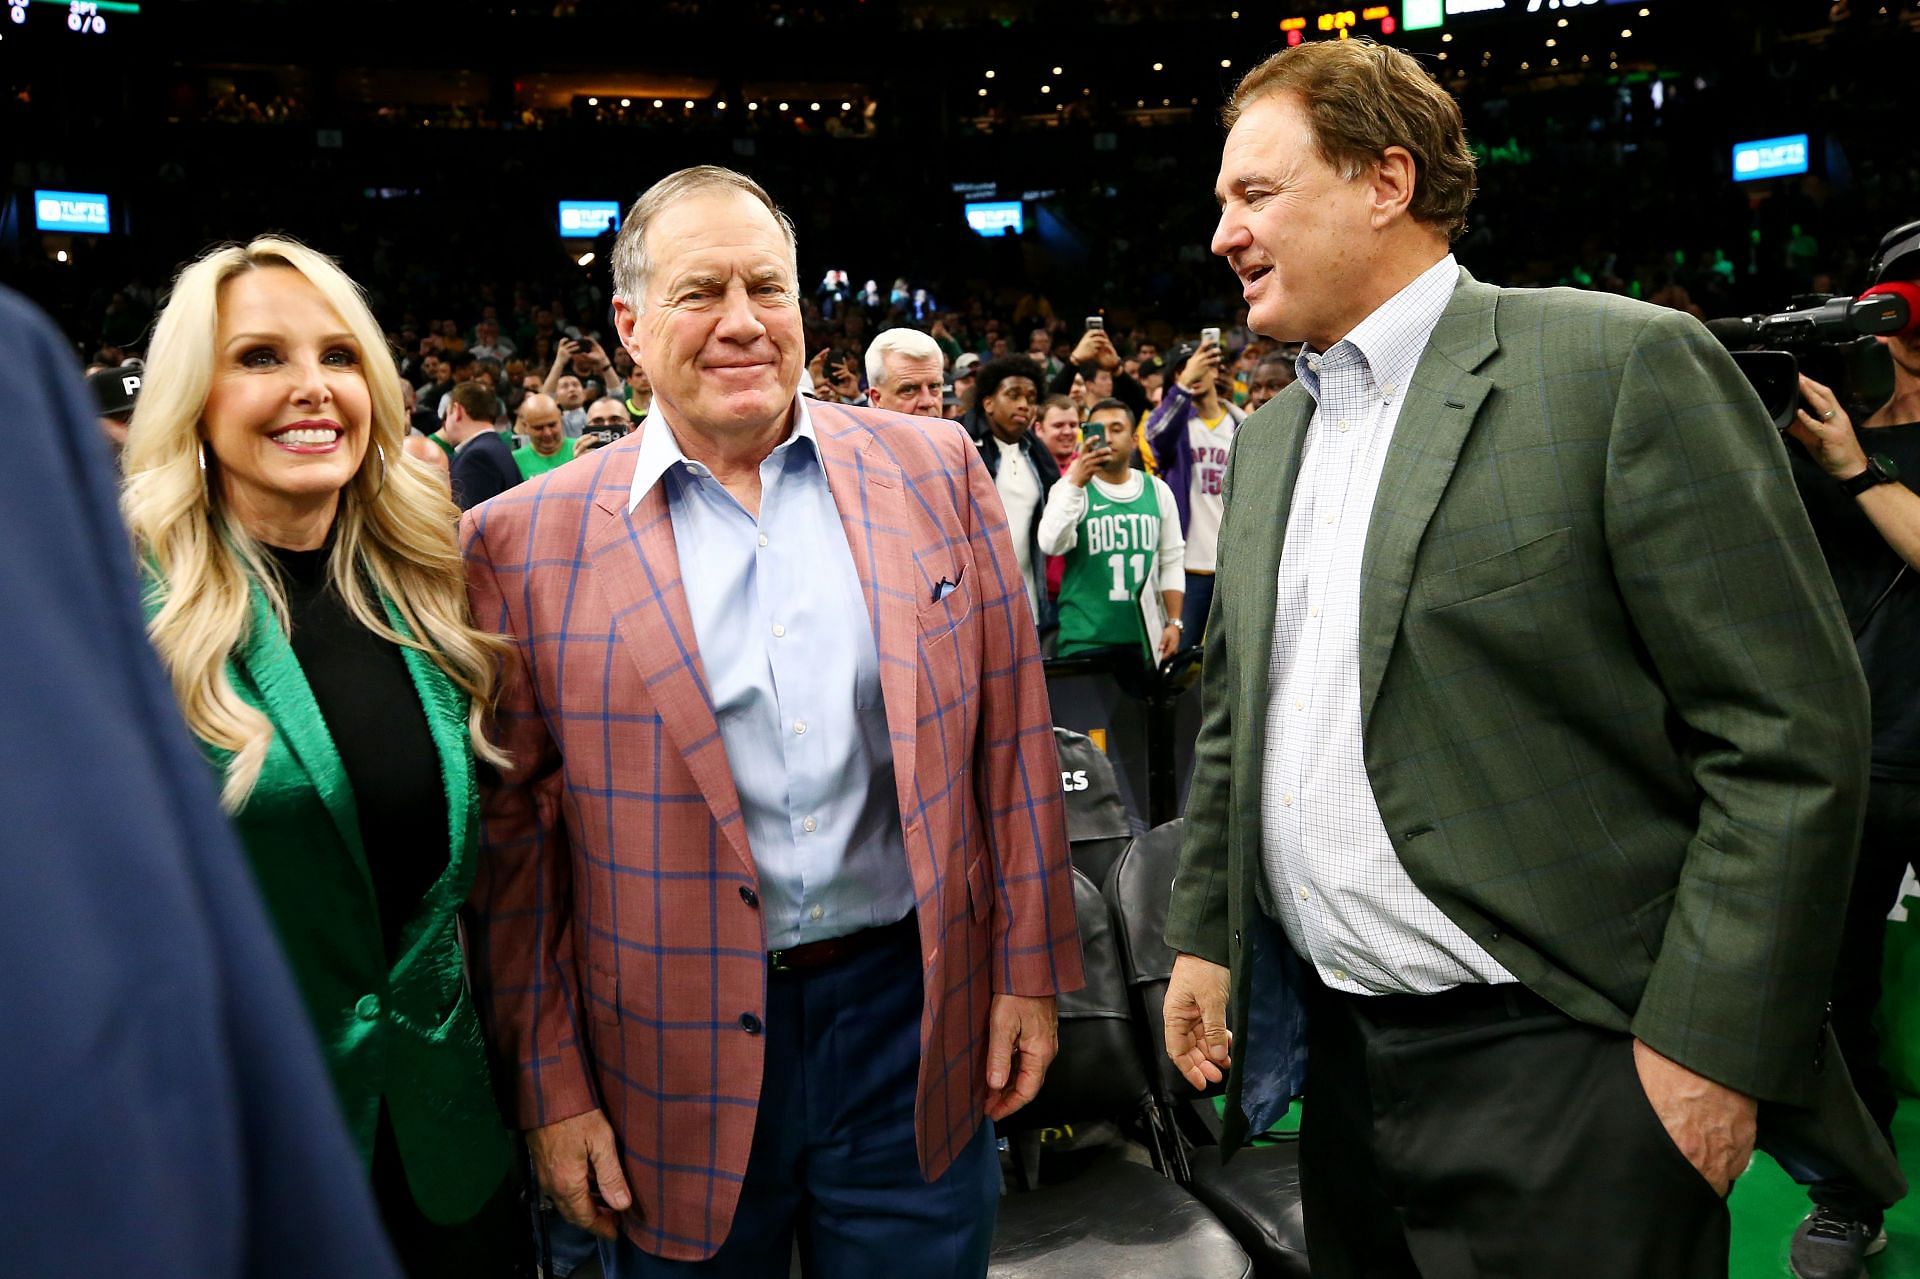 BOSTON, MASSACHUSETTS - FEBRUARY 07: From left, Linda Holliday, New England Patriots head coach Bill Belichick, and Celtics co-owner Stephen Pagliuca talk before the game between the Boston Celtics and the Los Angeles Lakers at TD Garden on February 07, 2019 in Boston, Massachusetts.